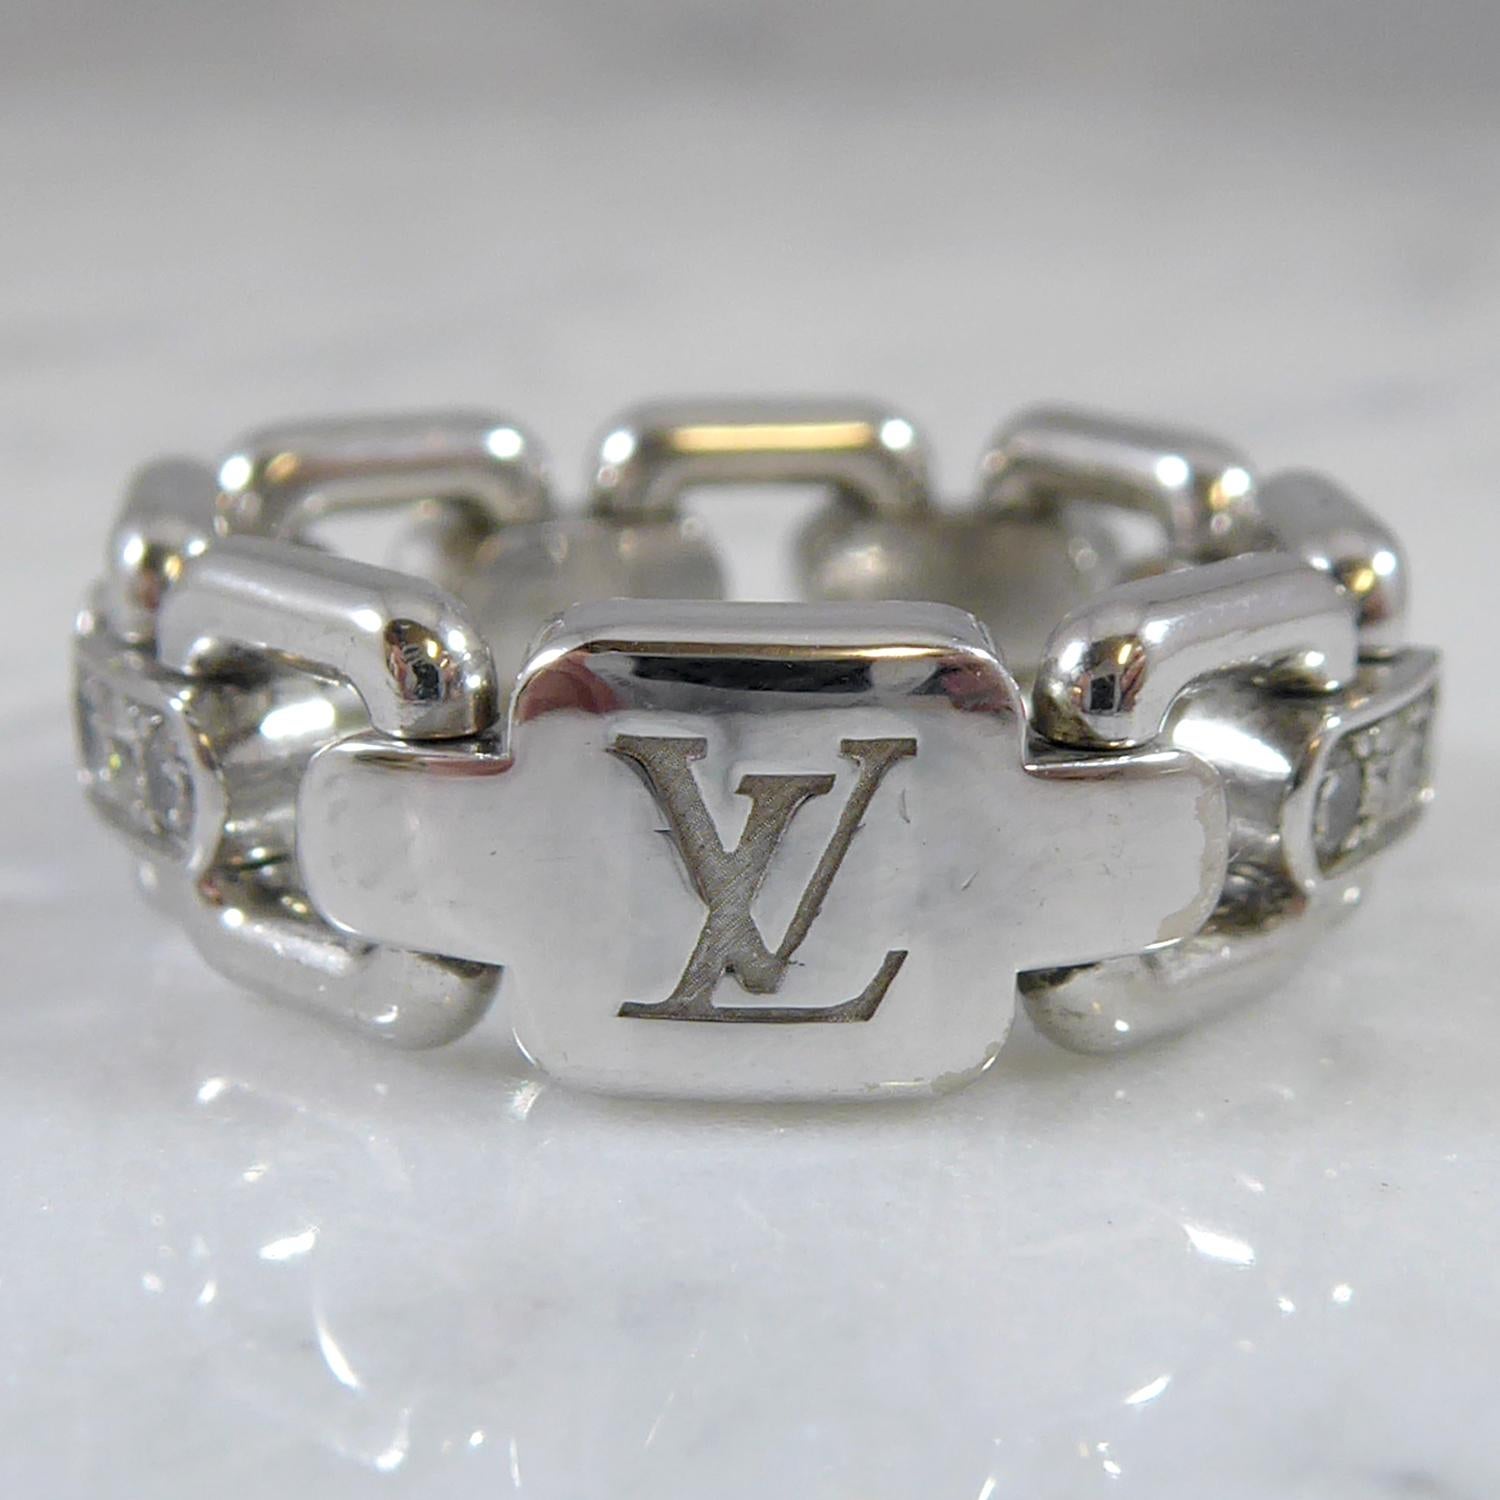 Round Cut 0.39 Carat Louis Vuitton Diamond and White Gold Ring, Flexible Cable Links